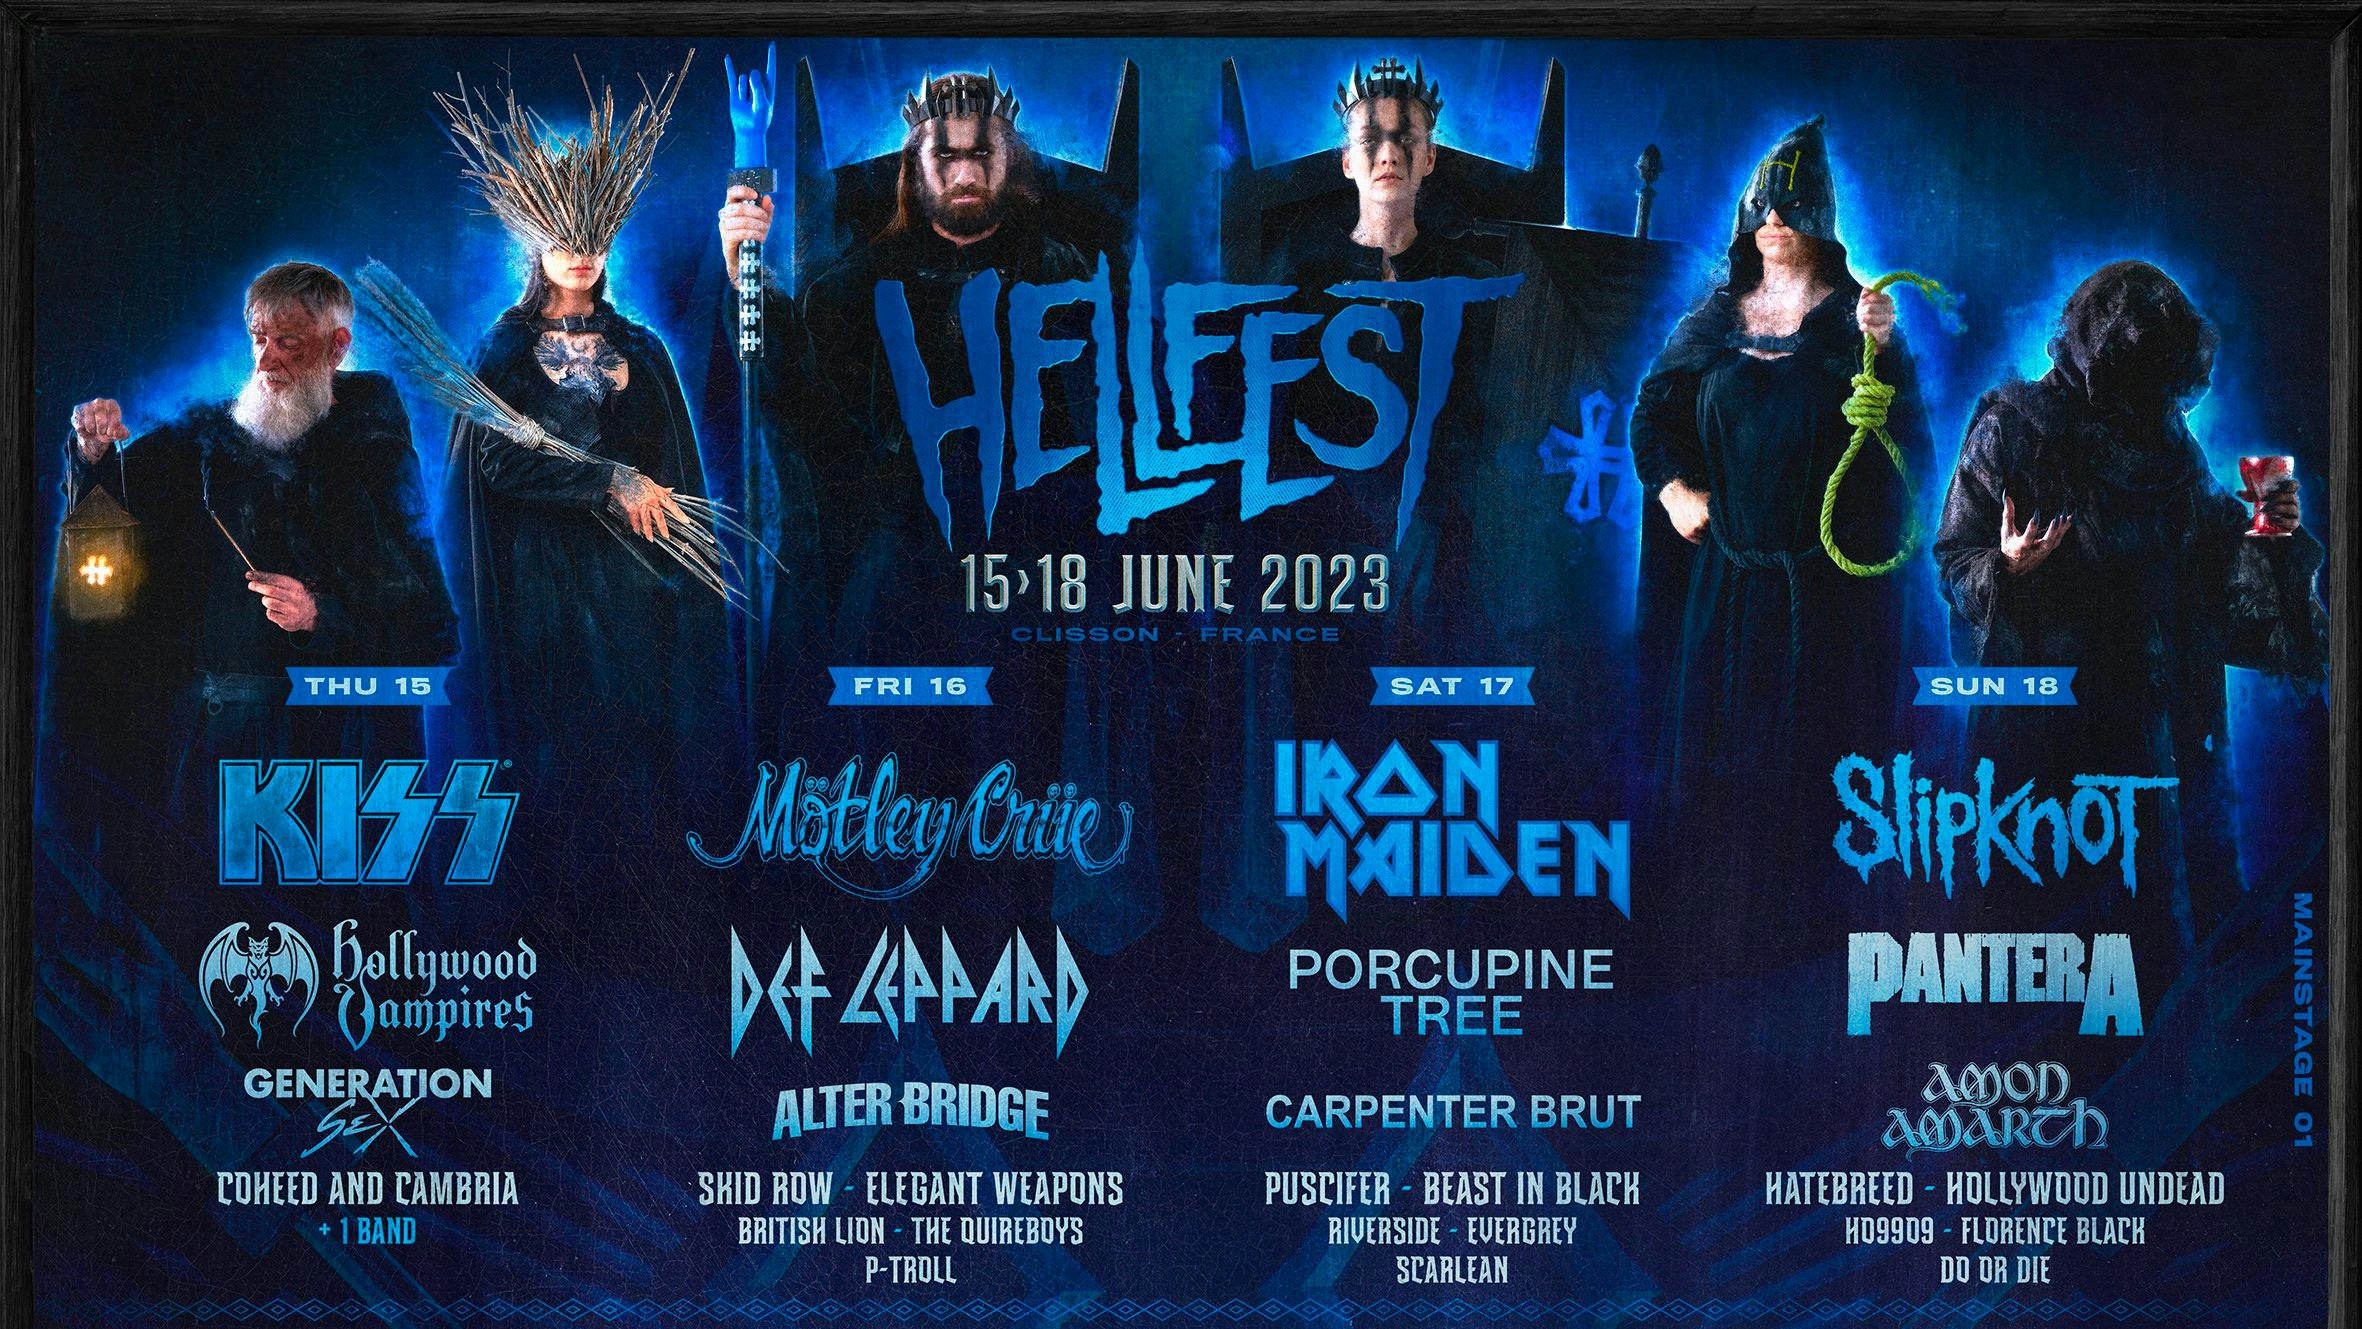 Hellfest announce KISS, Iron Maiden, Slipknot and loads more for 2023